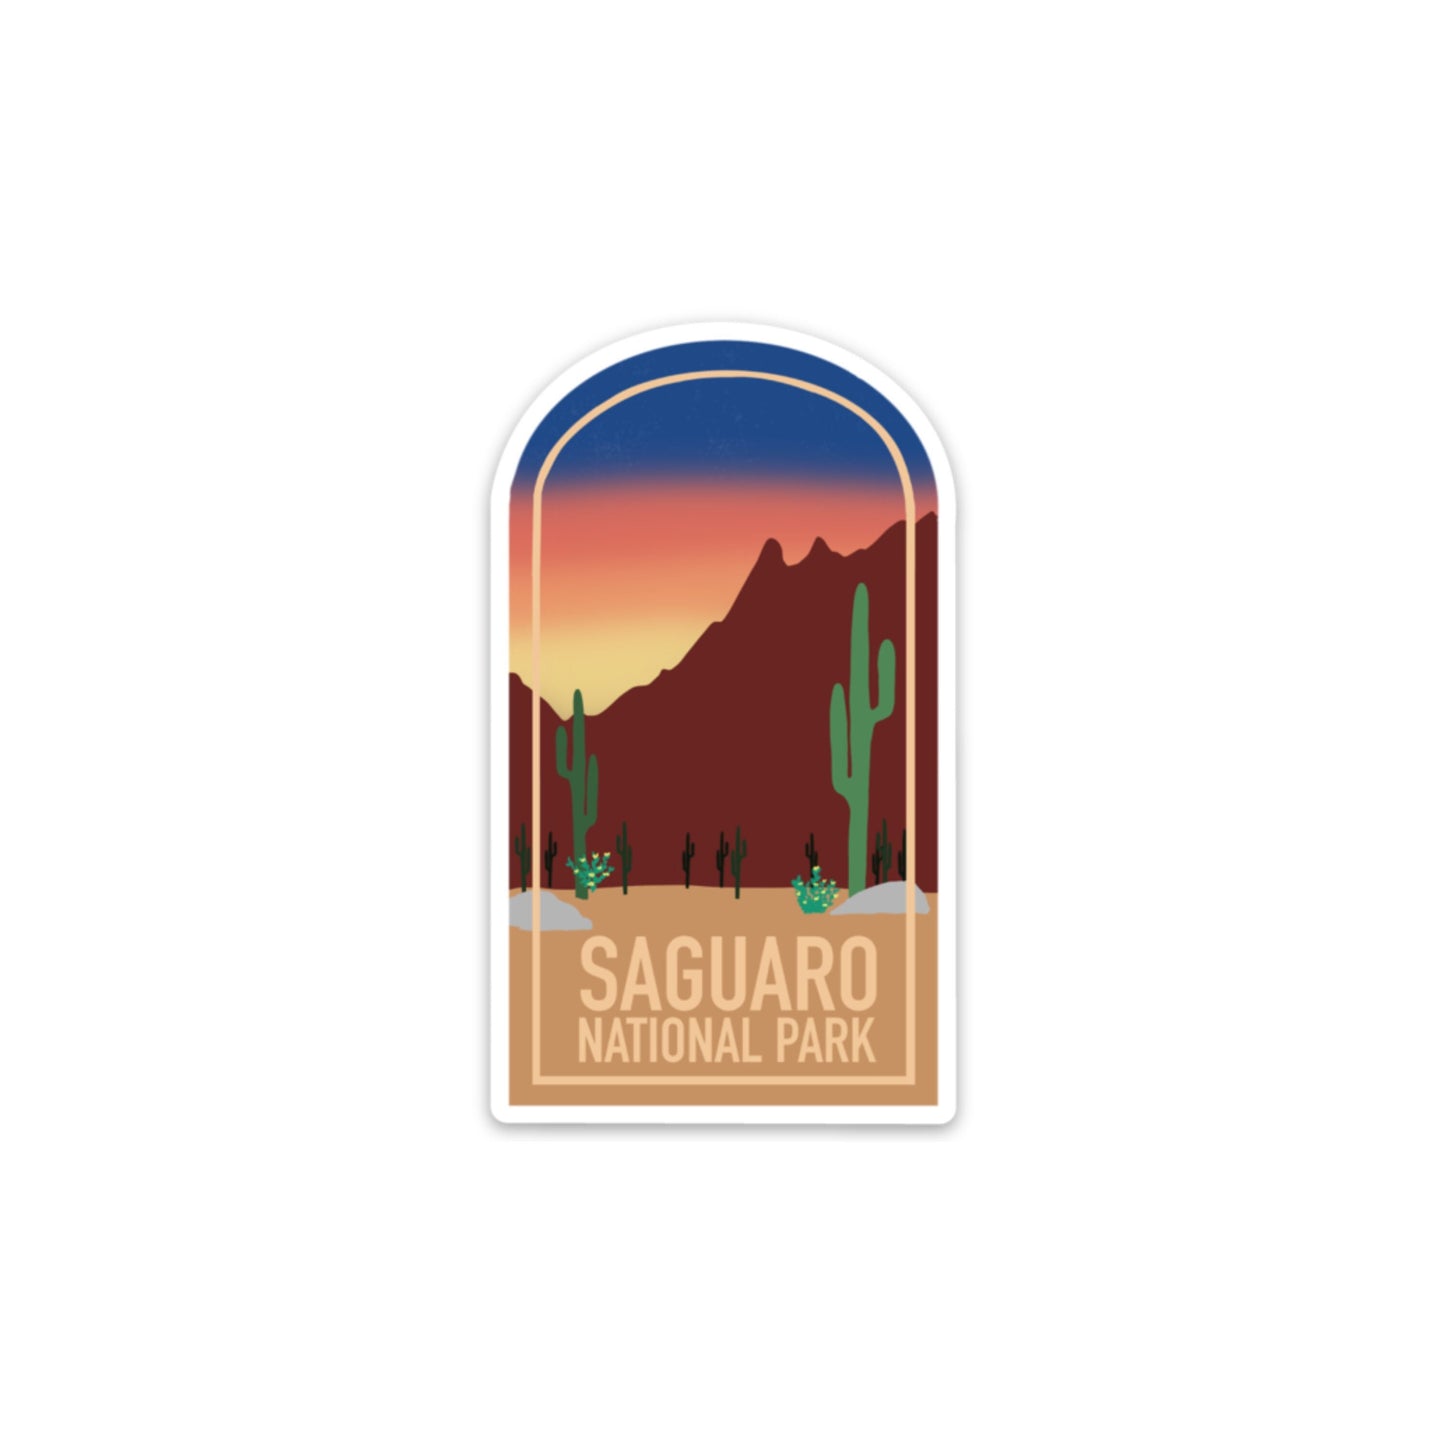 Saguaro National Park stickers, National Parks stickers, 3x3in. Vinyl stickers perfect for Water Bottles, Bullet Journals, Laptops, etc.